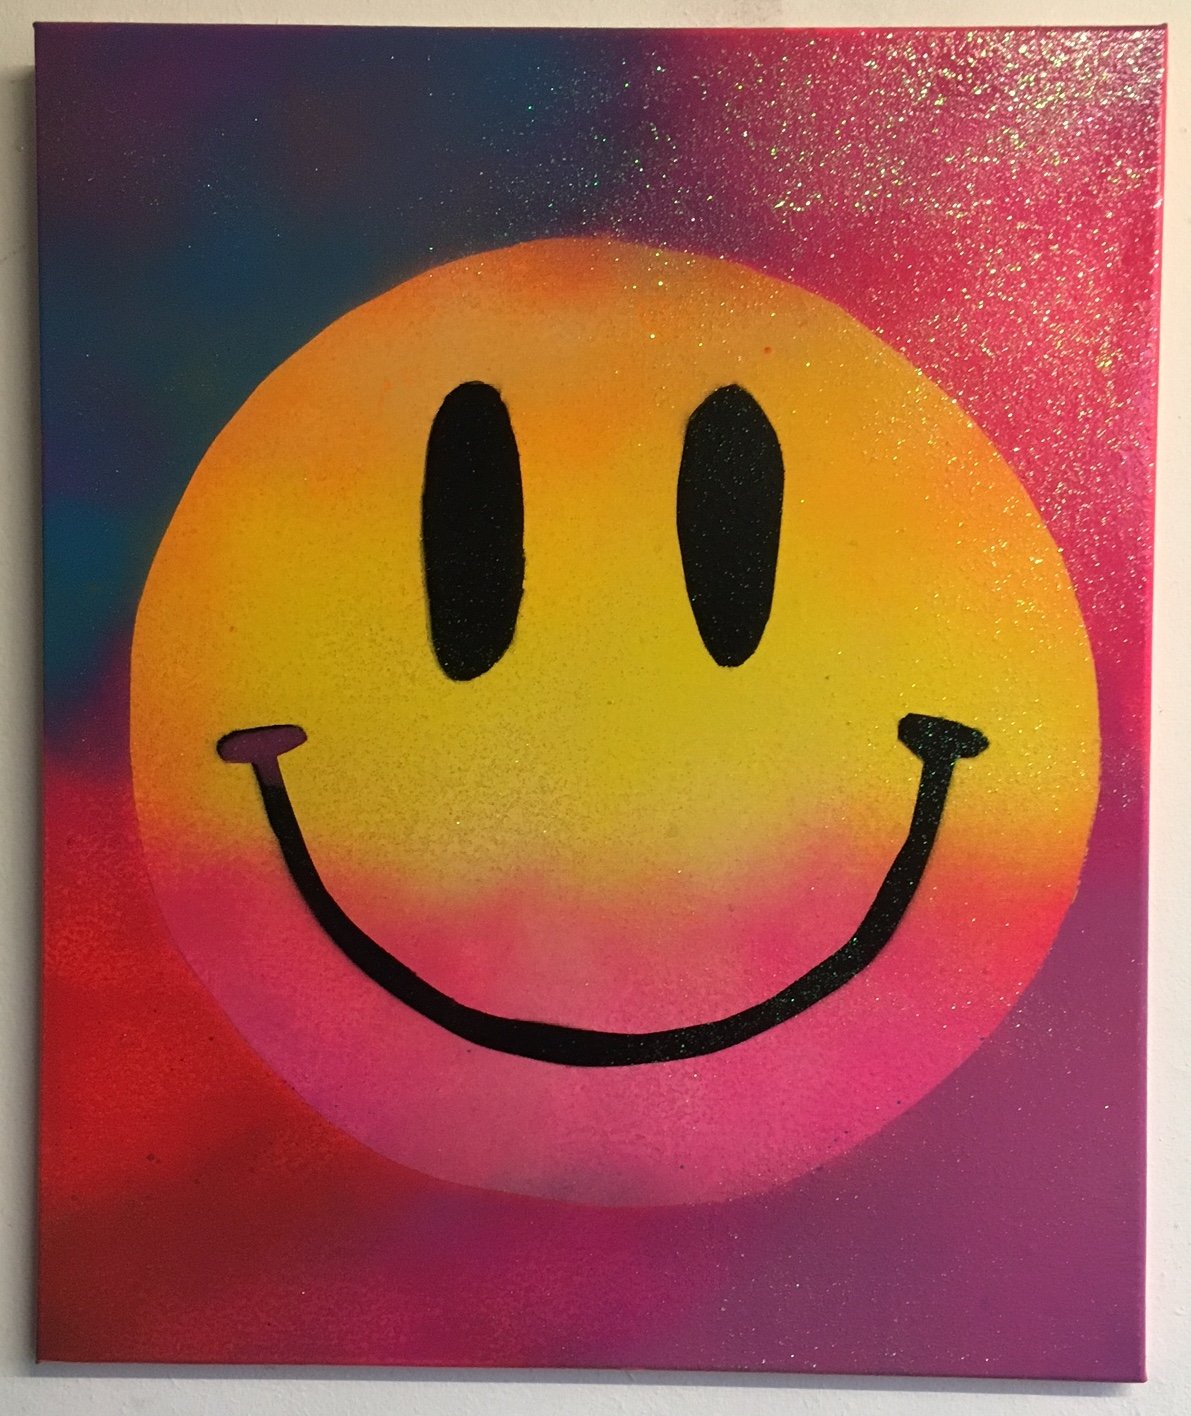 happy painting 9 by Barrie J Davies 2016, Mixed media painting on canvas, 50cm x 60cm, unframed. Barrie J Davies is an Artist - Pop Art and Street art inspired Artist based in Brighton England UK - Pop Art Paintings, Street Art Prints & Editions available.